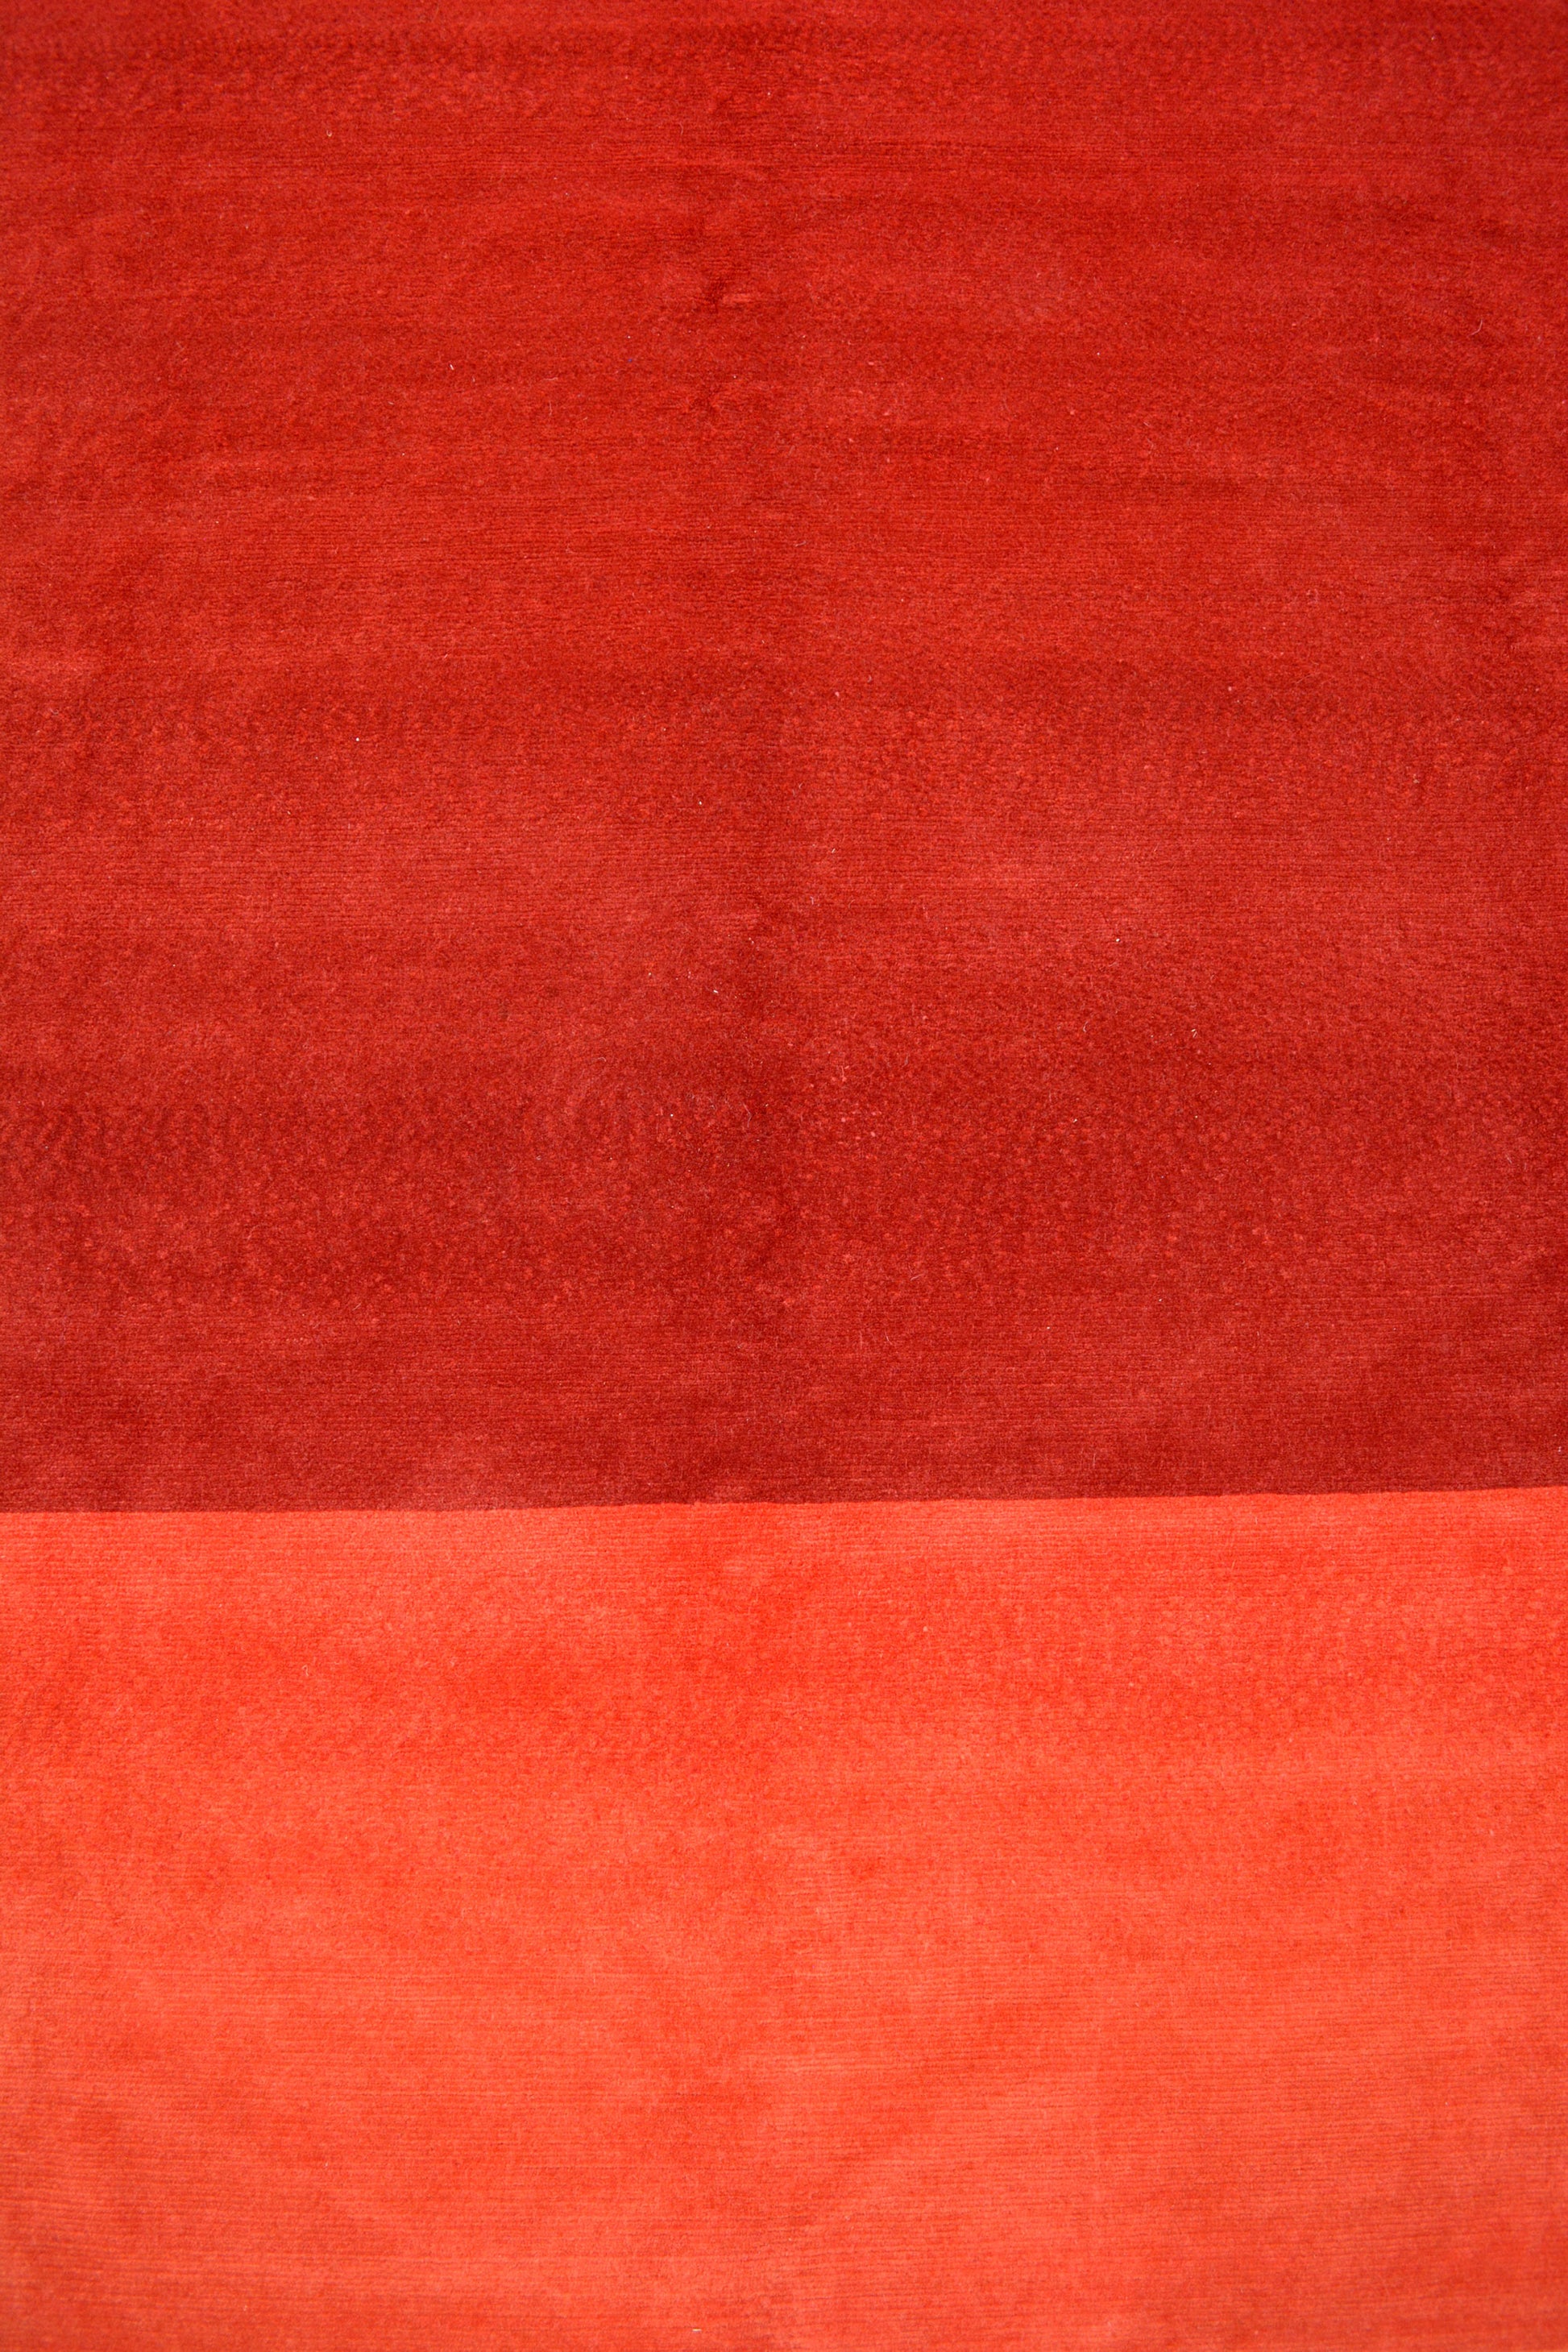 The inner rectangle is another gradient which goes from dark red at the top towards light red in the bottom.